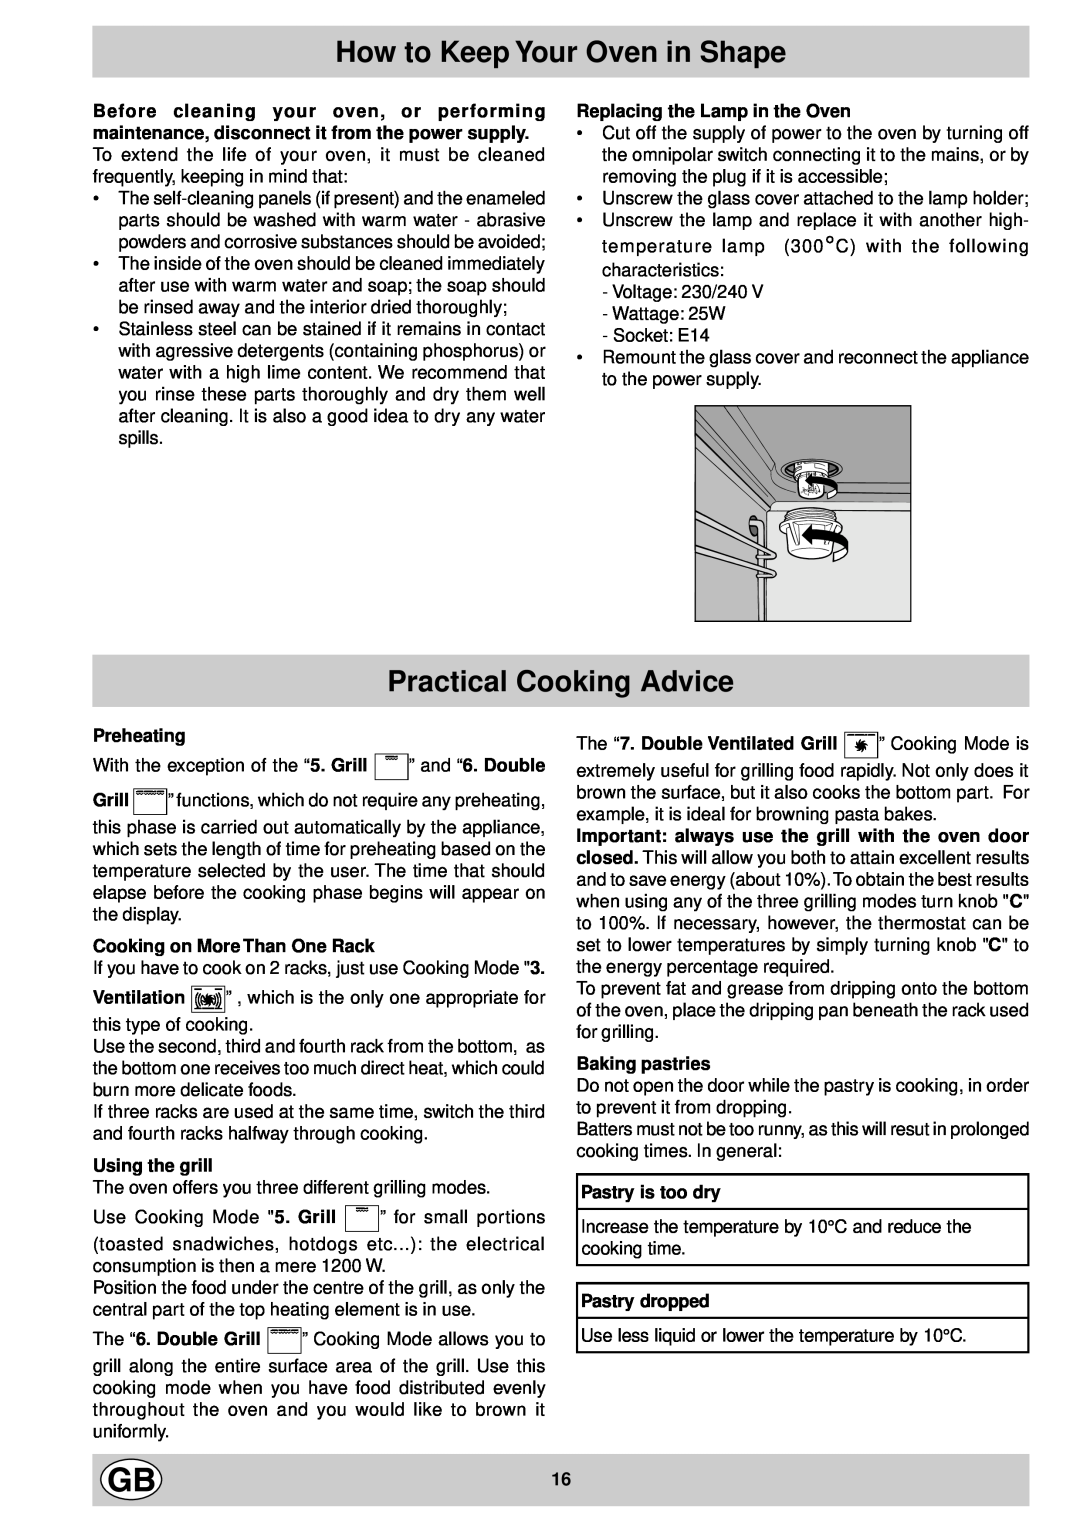 Ariston FD88 manual How to Keep Your Oven in Shape, Practical Cooking Advice 